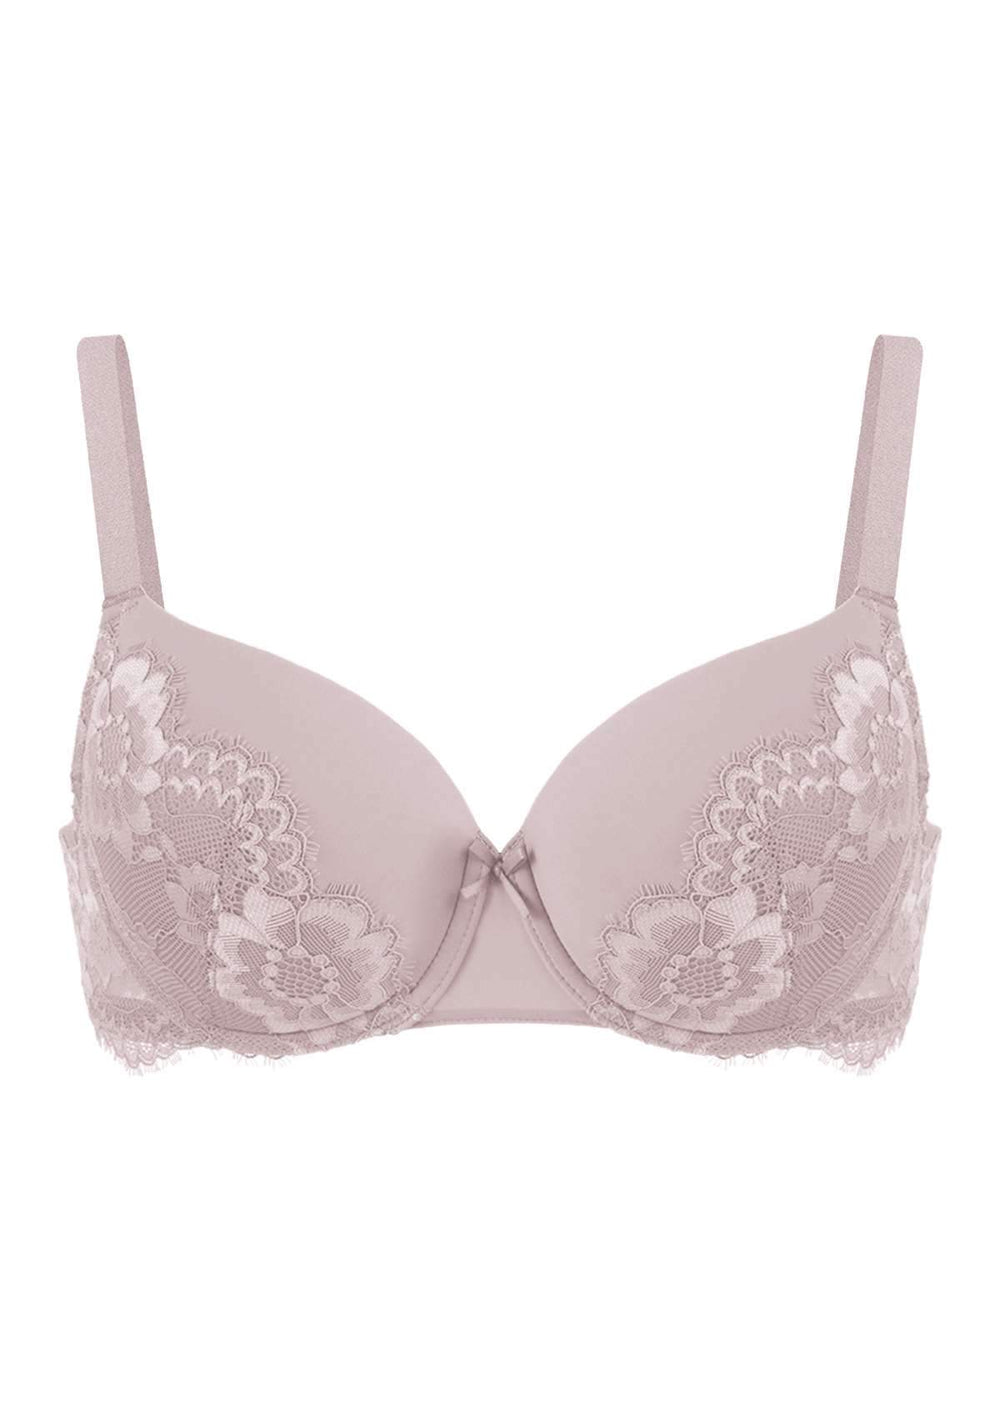 Push-up bra with wing for €34.99 - Bra Accessories - Hunkemöller